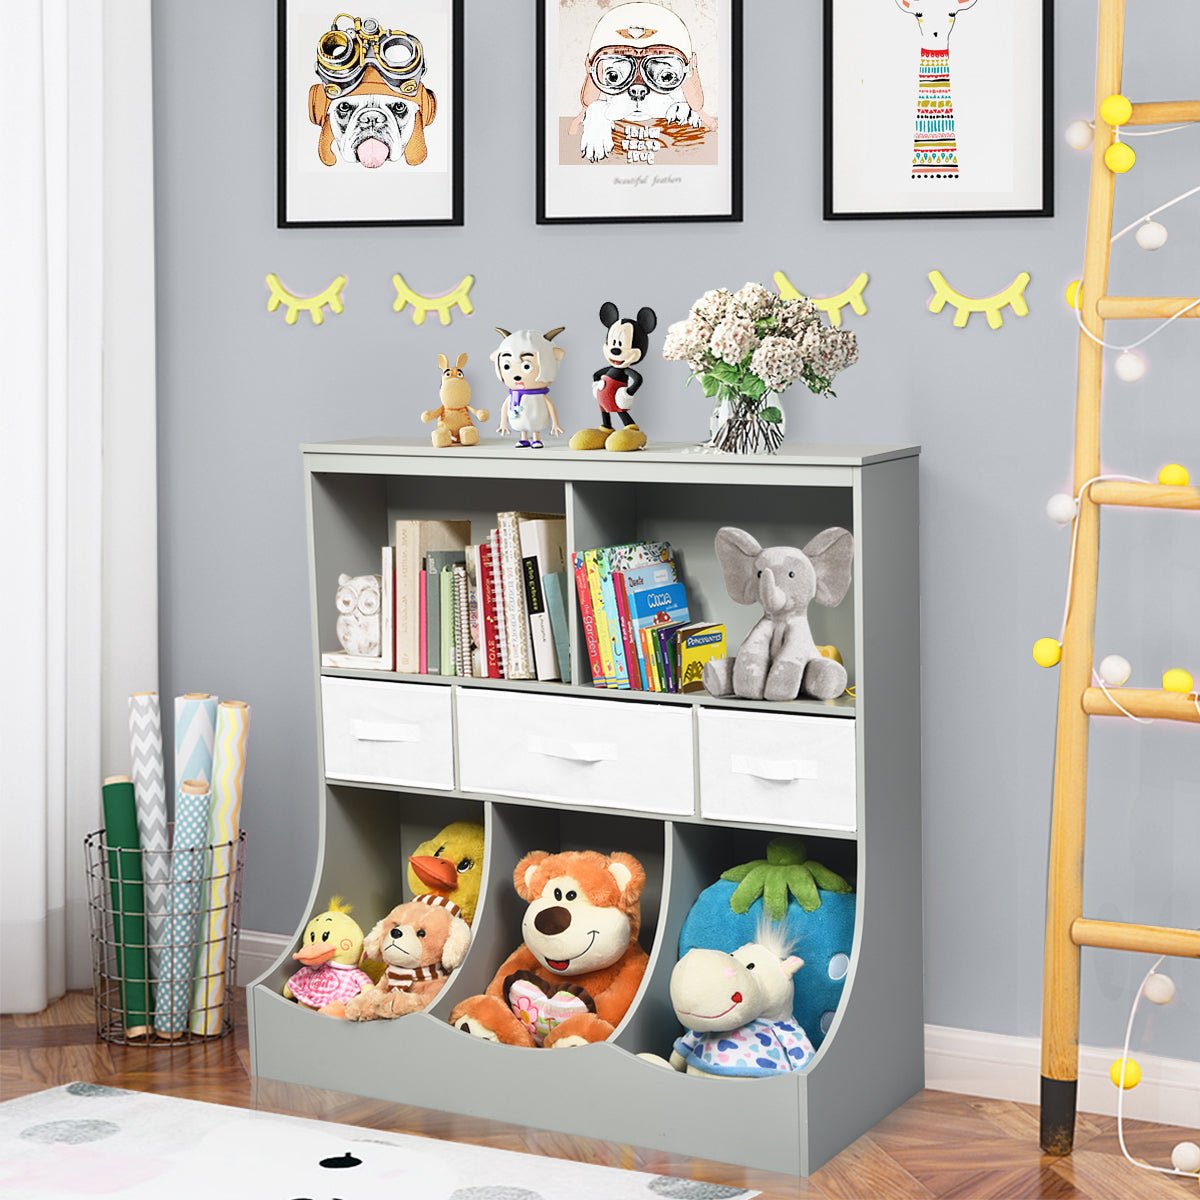 13-Layer Cubby Bin Combo - Efficient Grey & White Storage for Kids Room